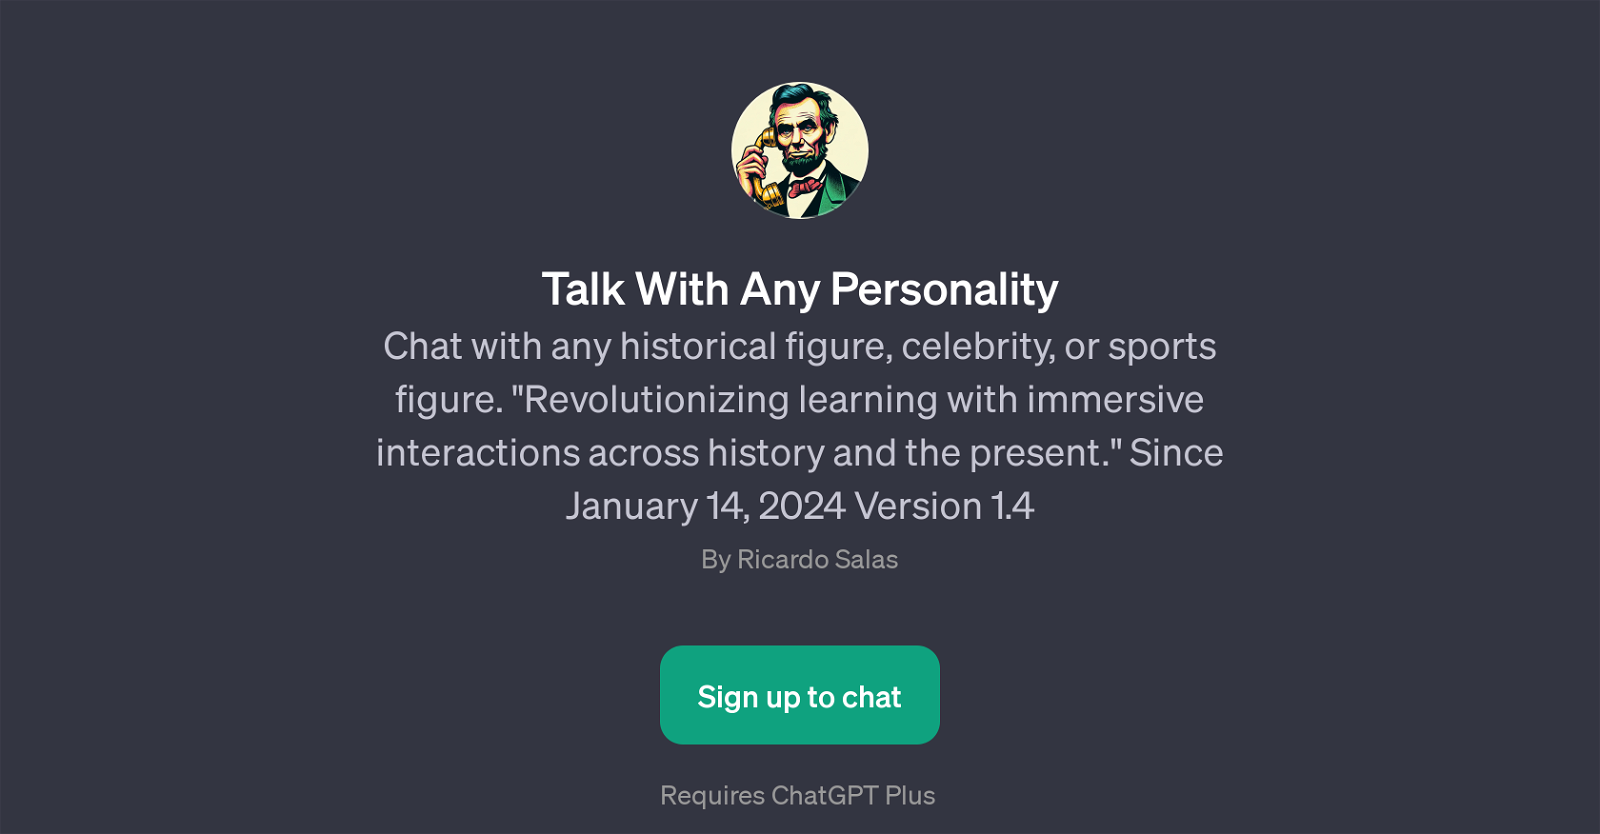 Talk With Any Personality website